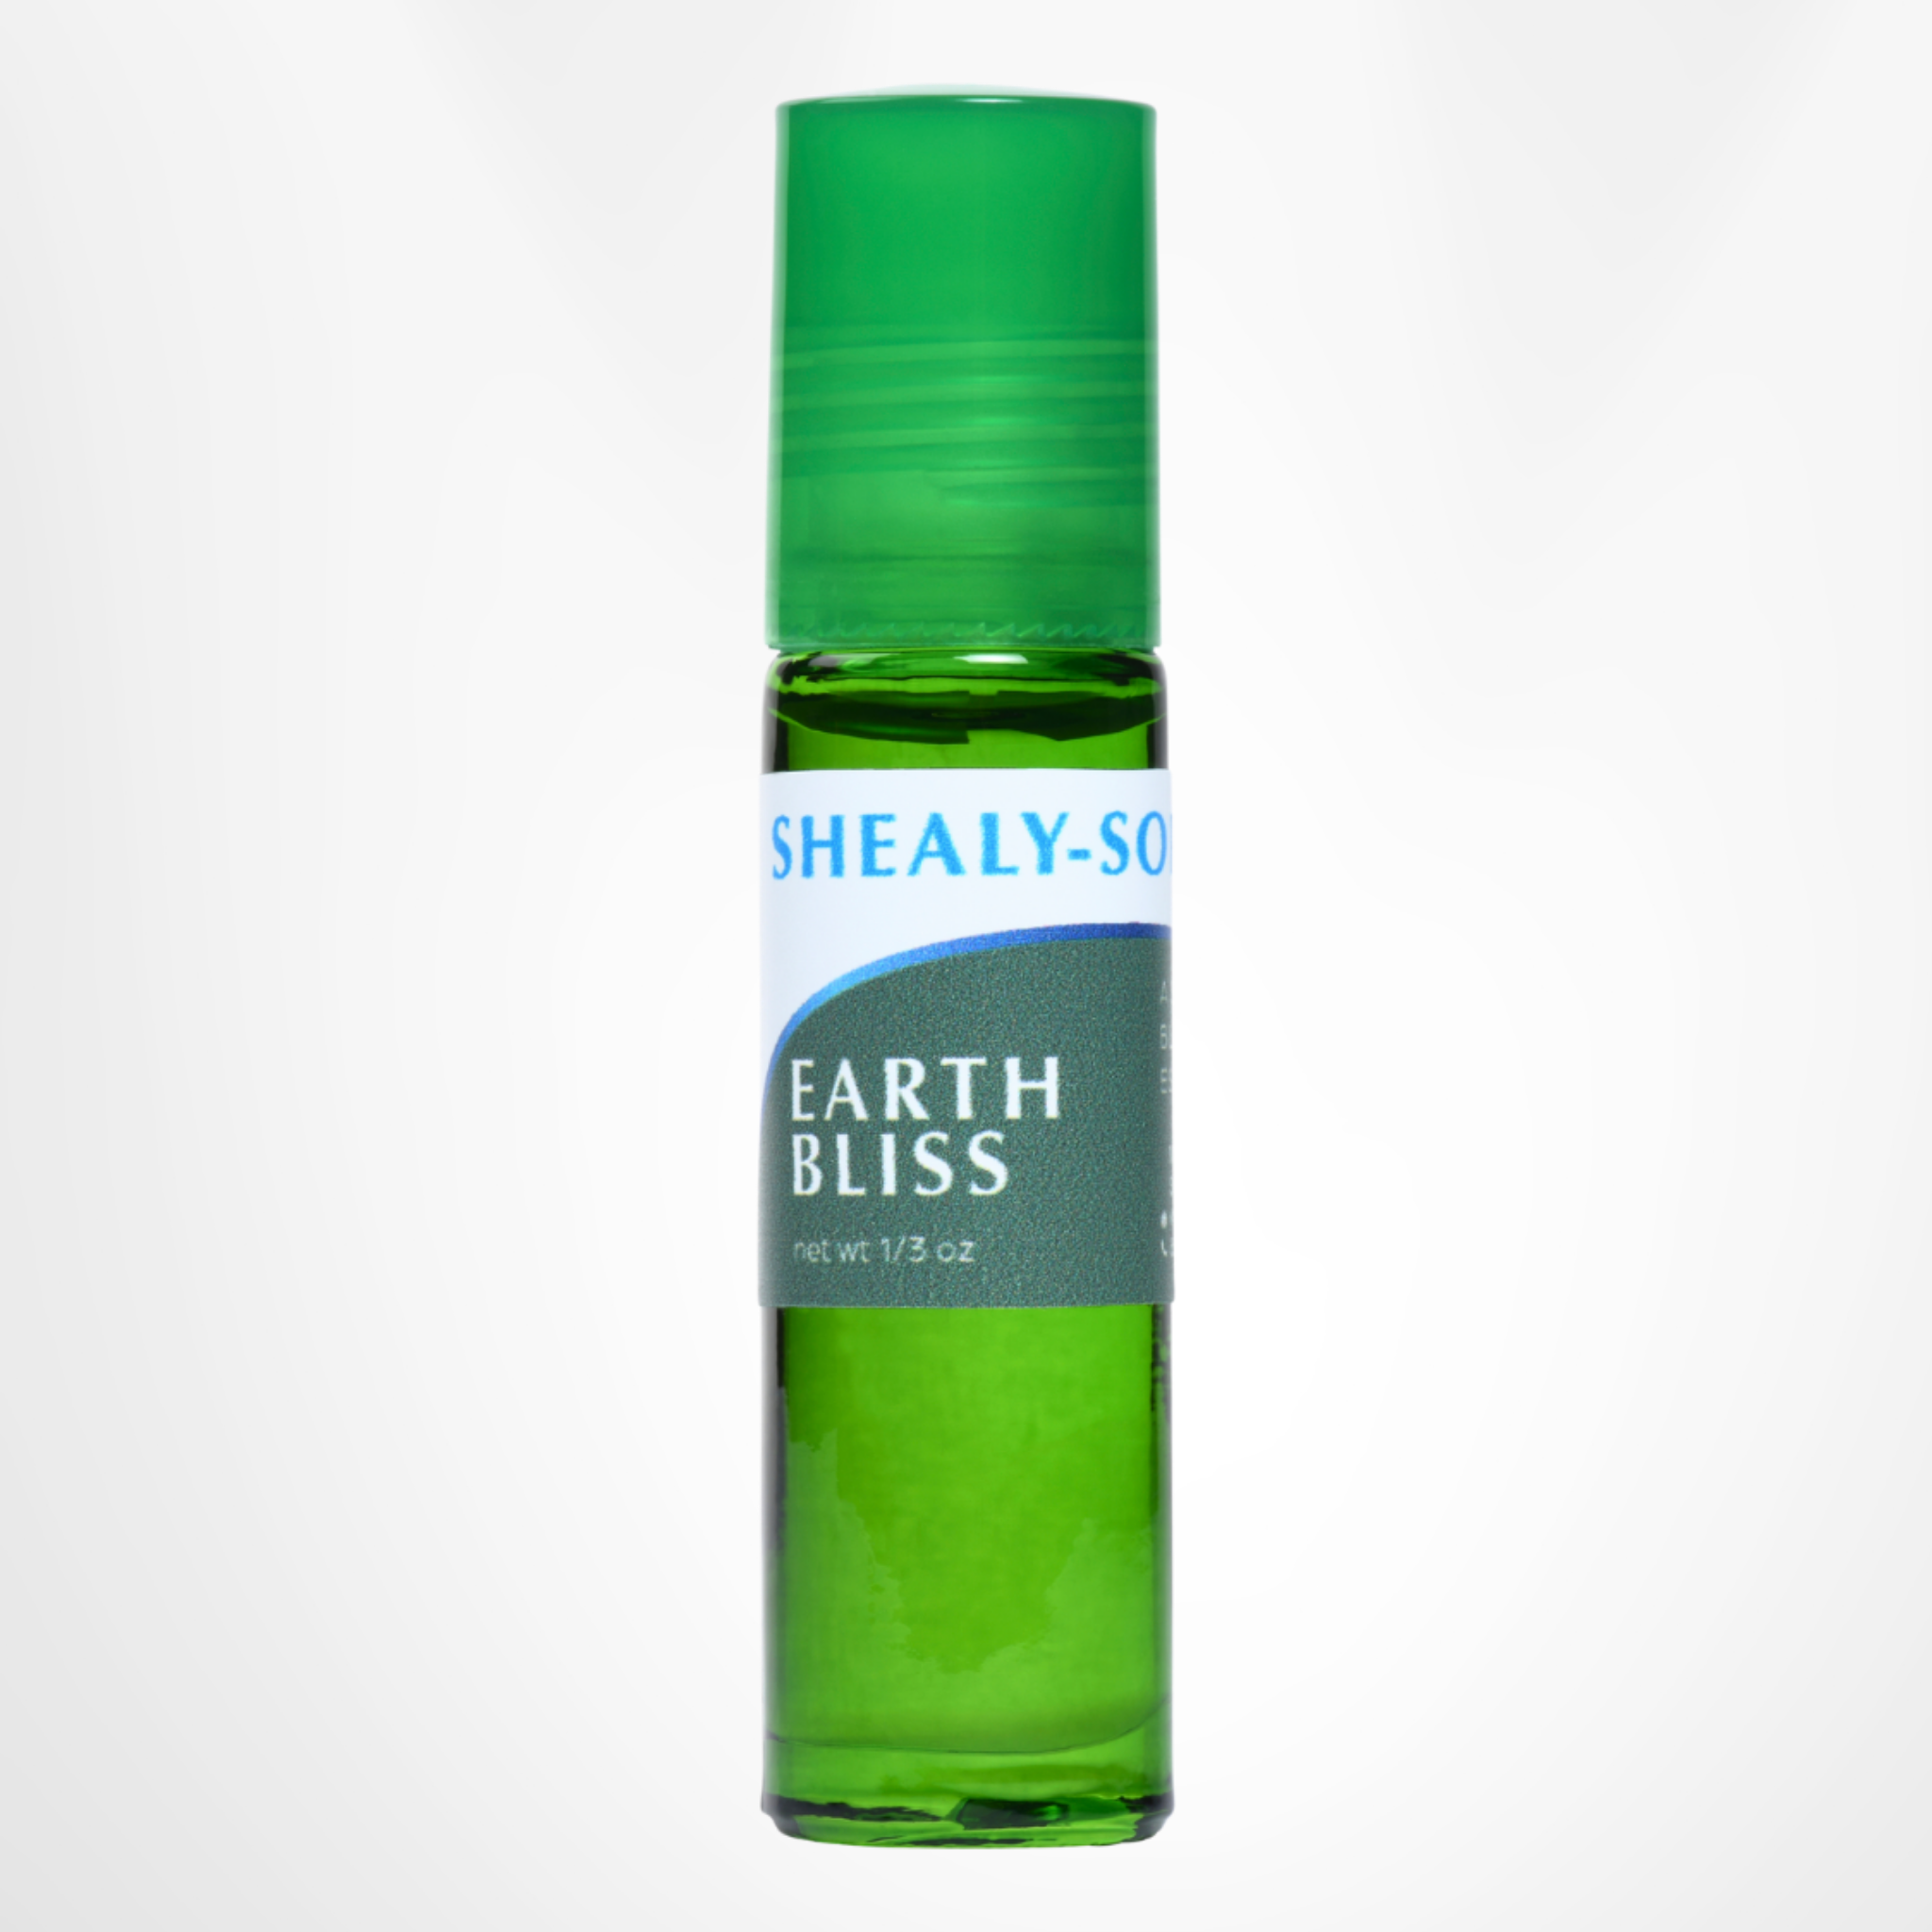 Dr. sHEALy's Earth Bliss Essential Oil